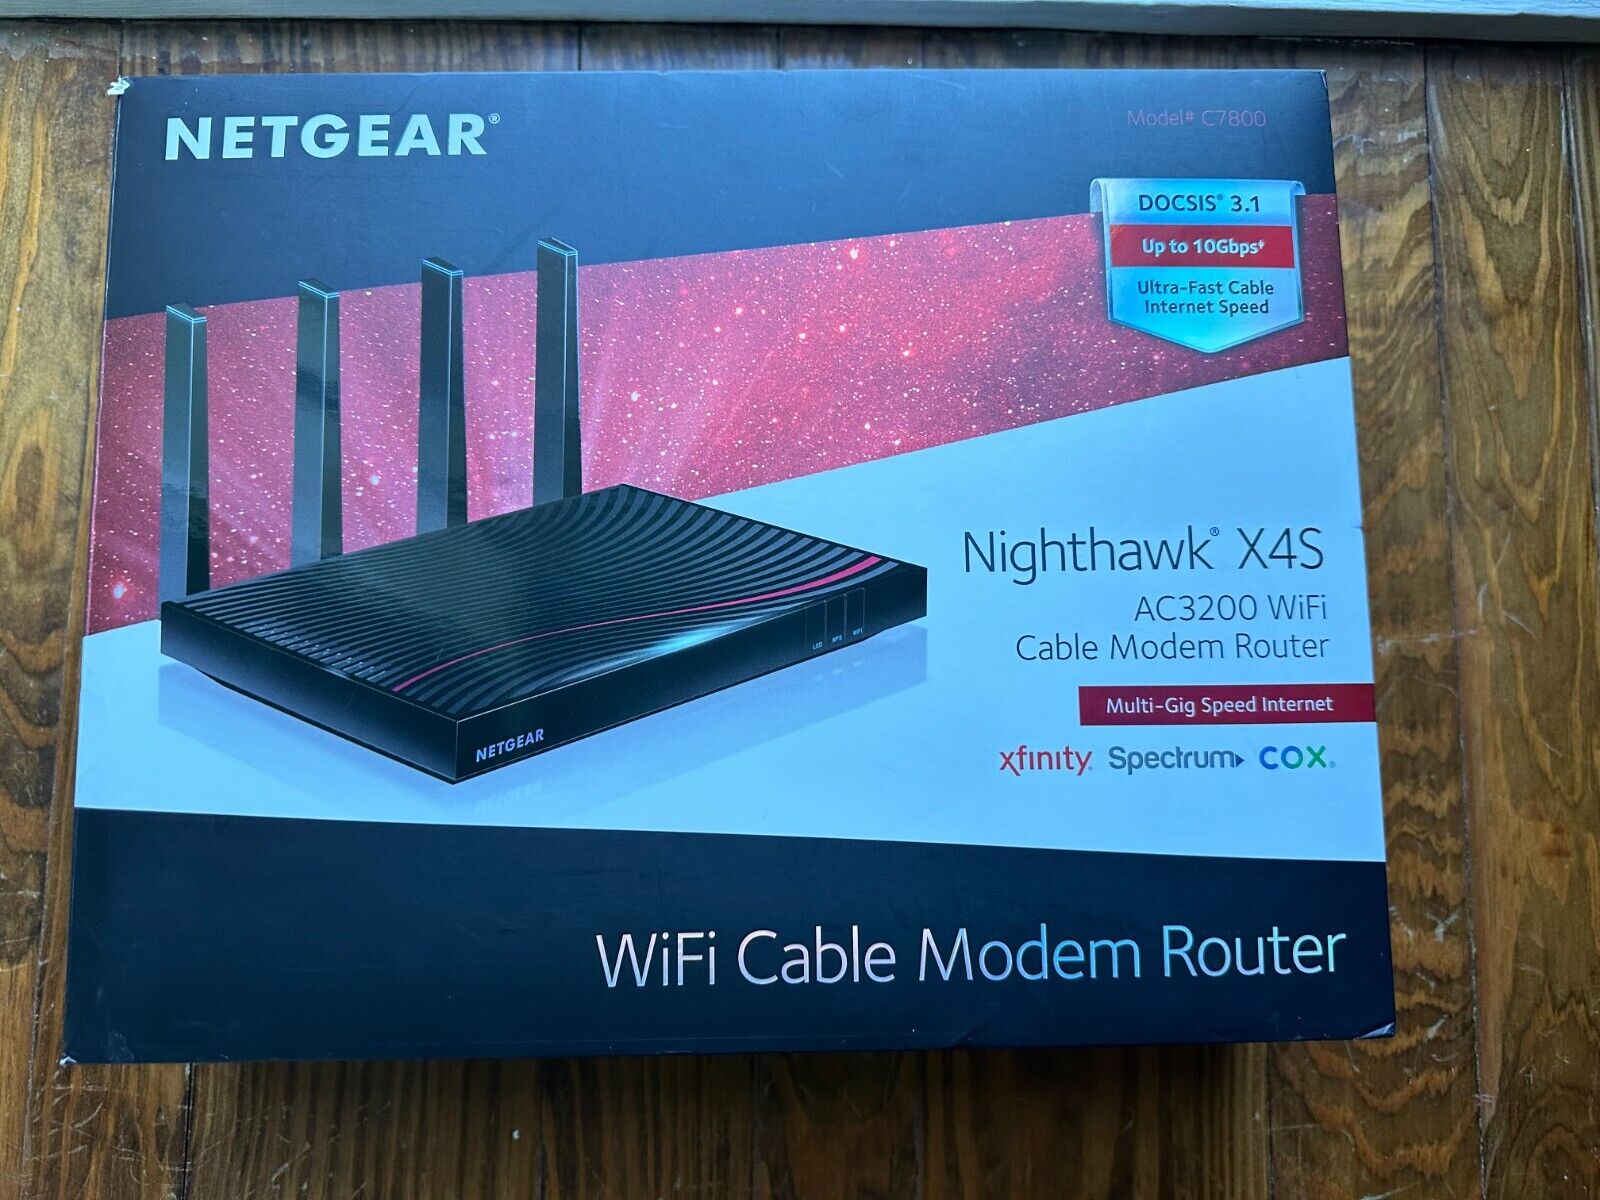 Netgear Nighthawk X4S AC3200 WiFi Cable Modem Router, Original Packaging, Used